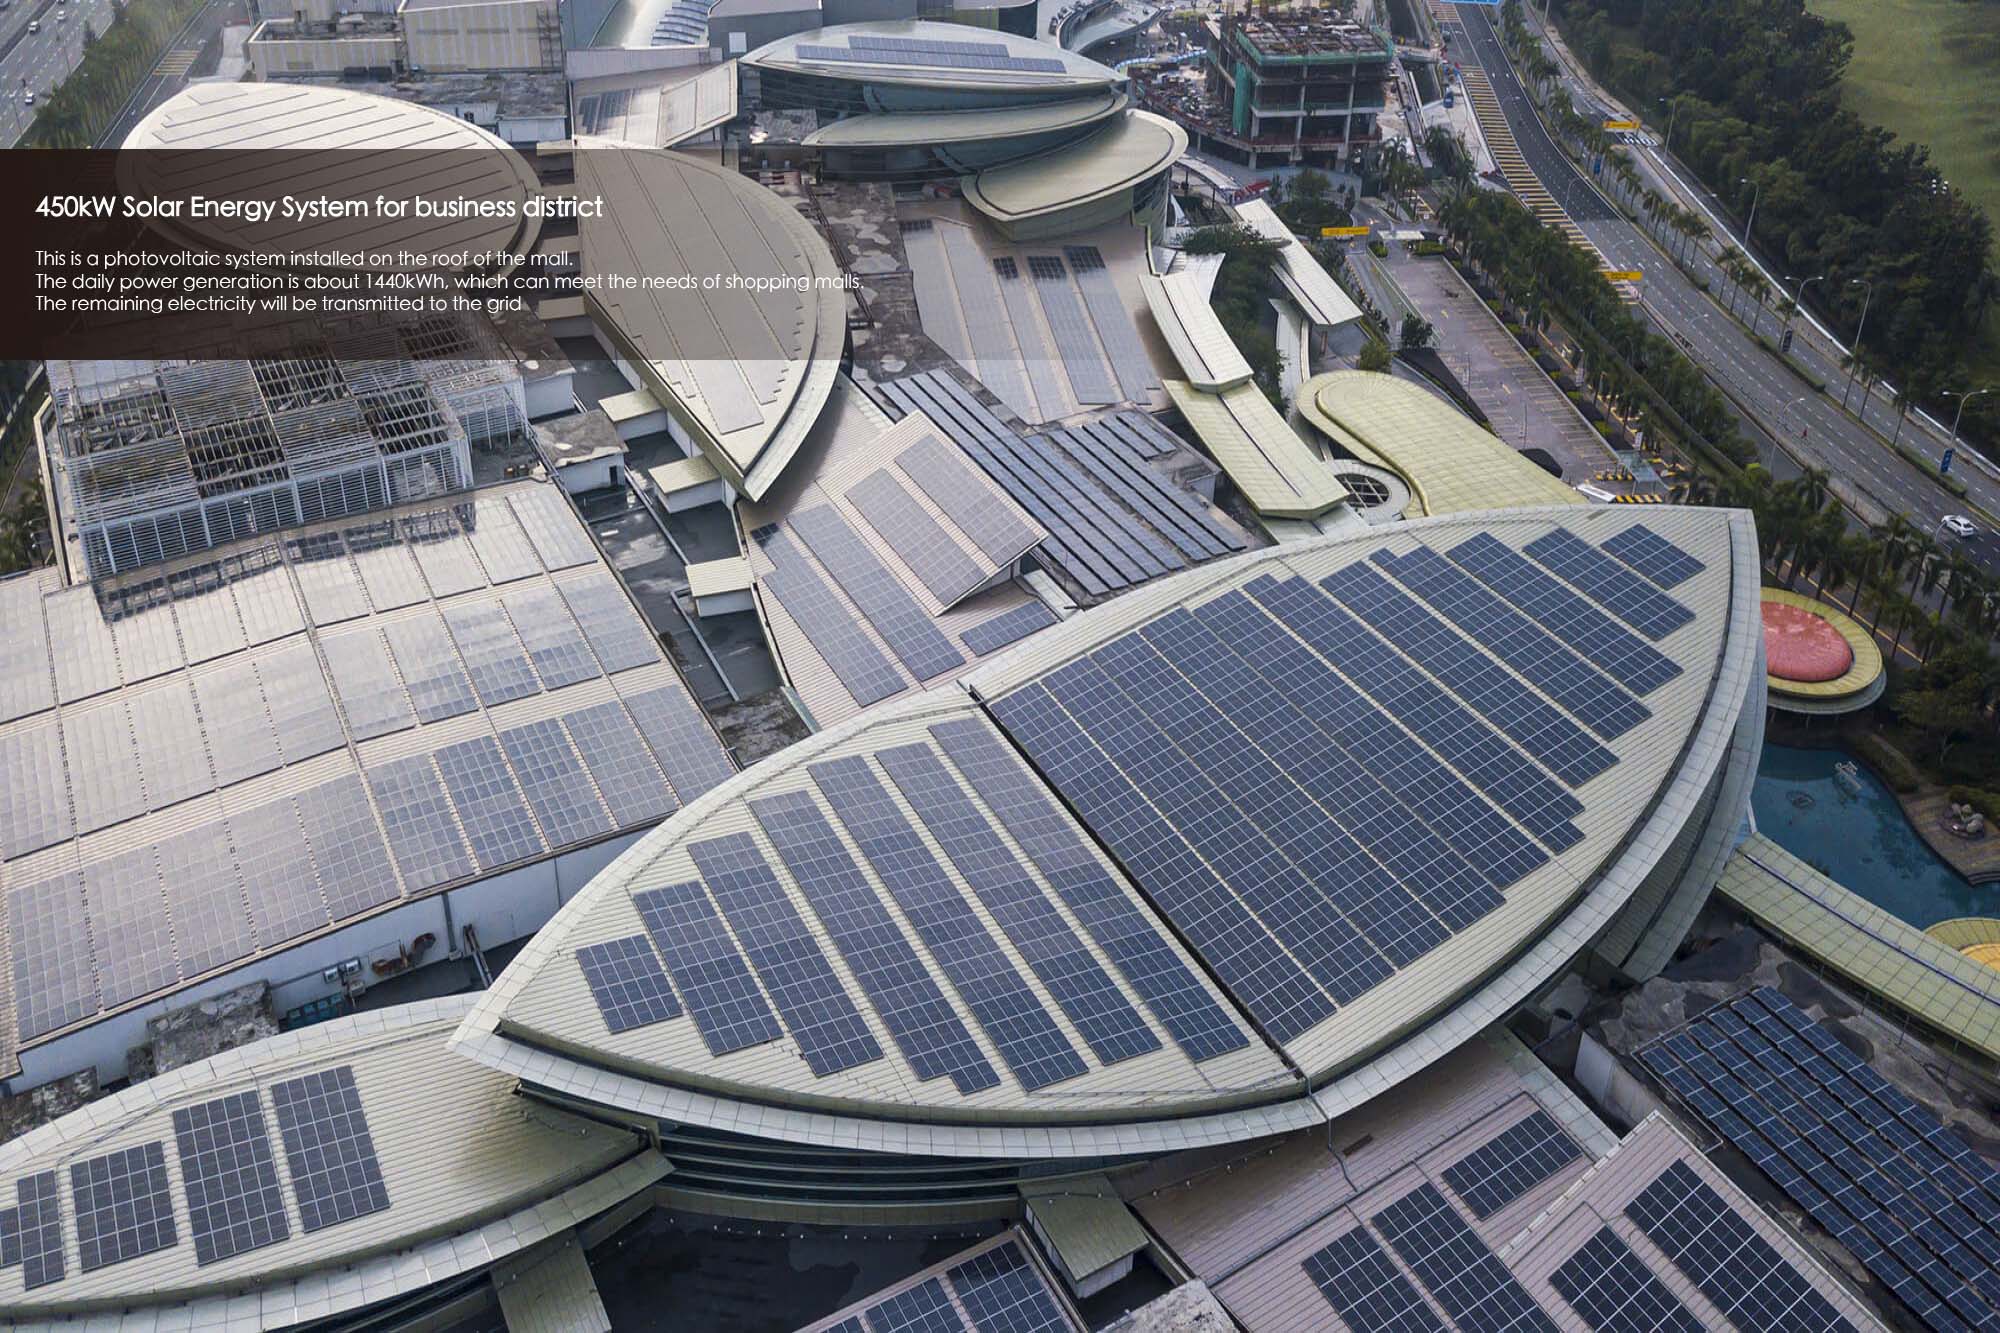 450kW Solar Energy System alang sa business district